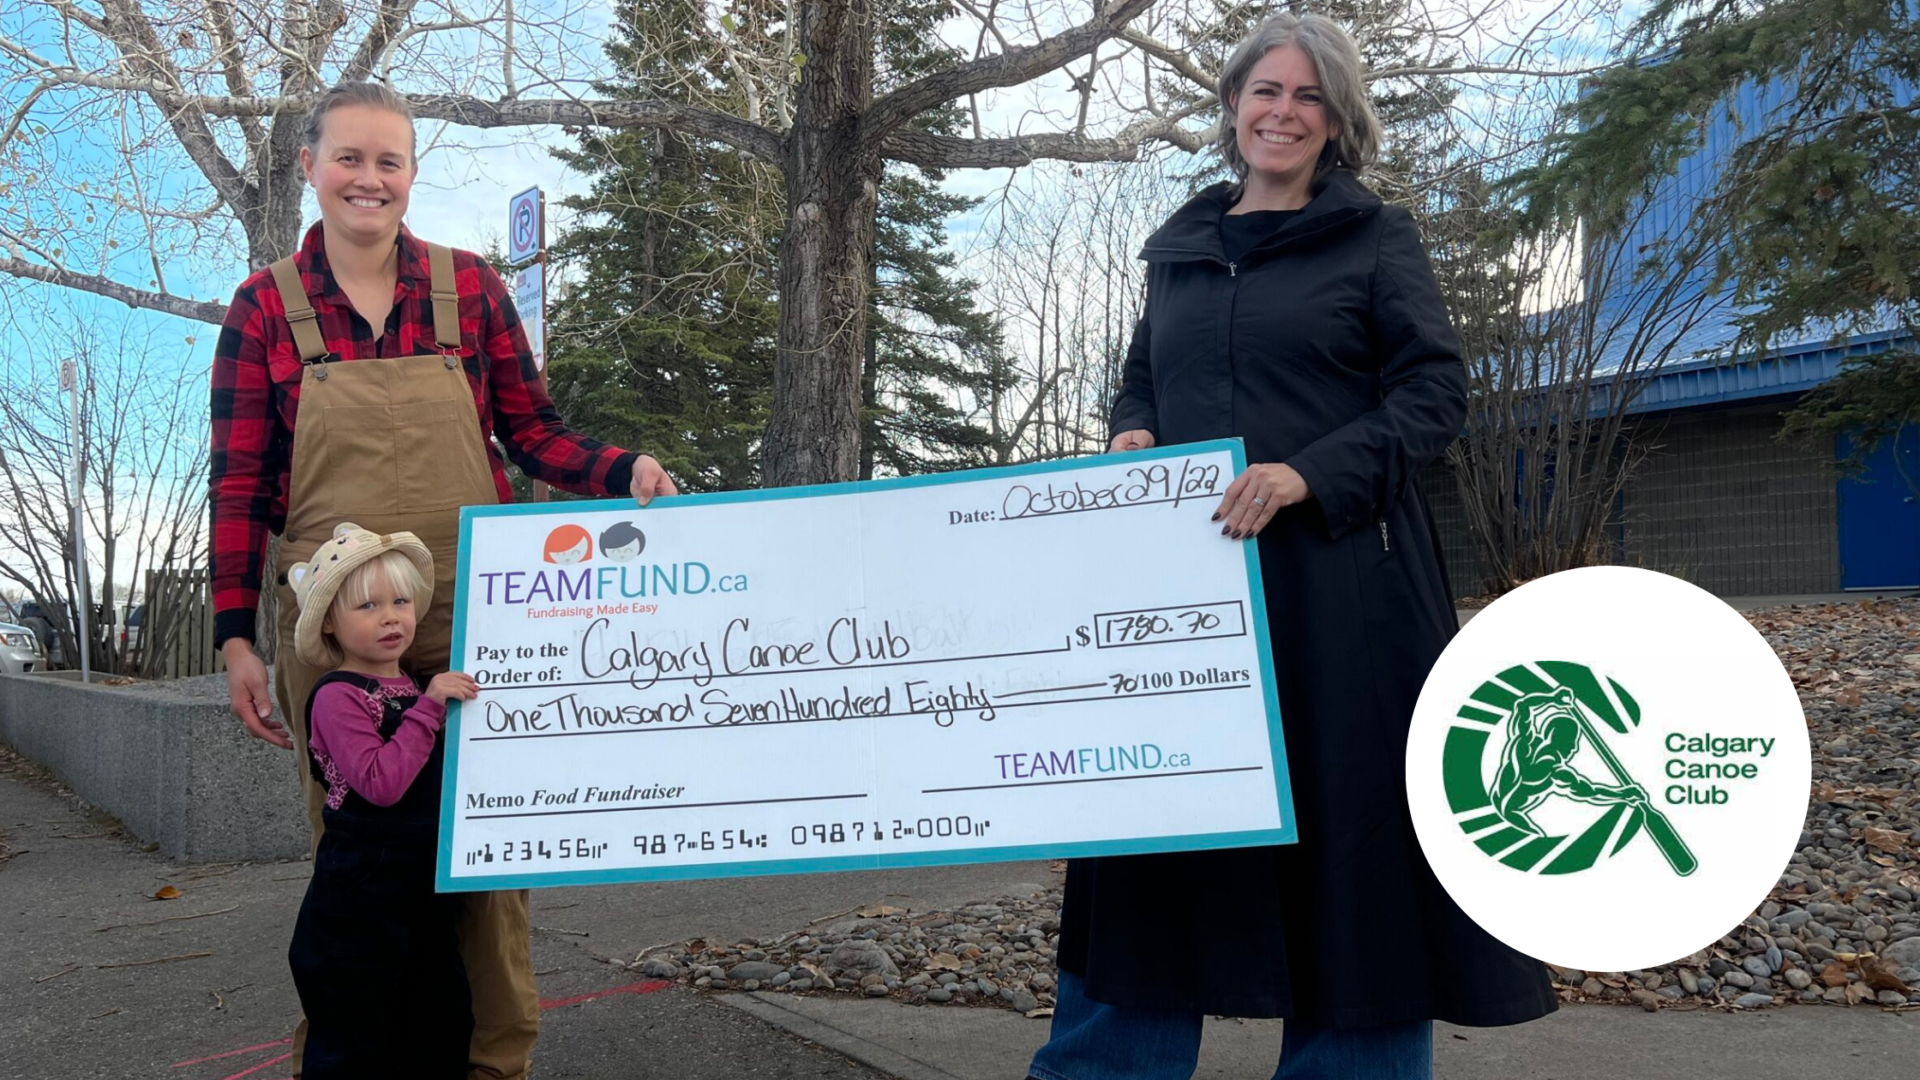 Calgary Canoe Club Raises Over $1700 for Competitive Paddling